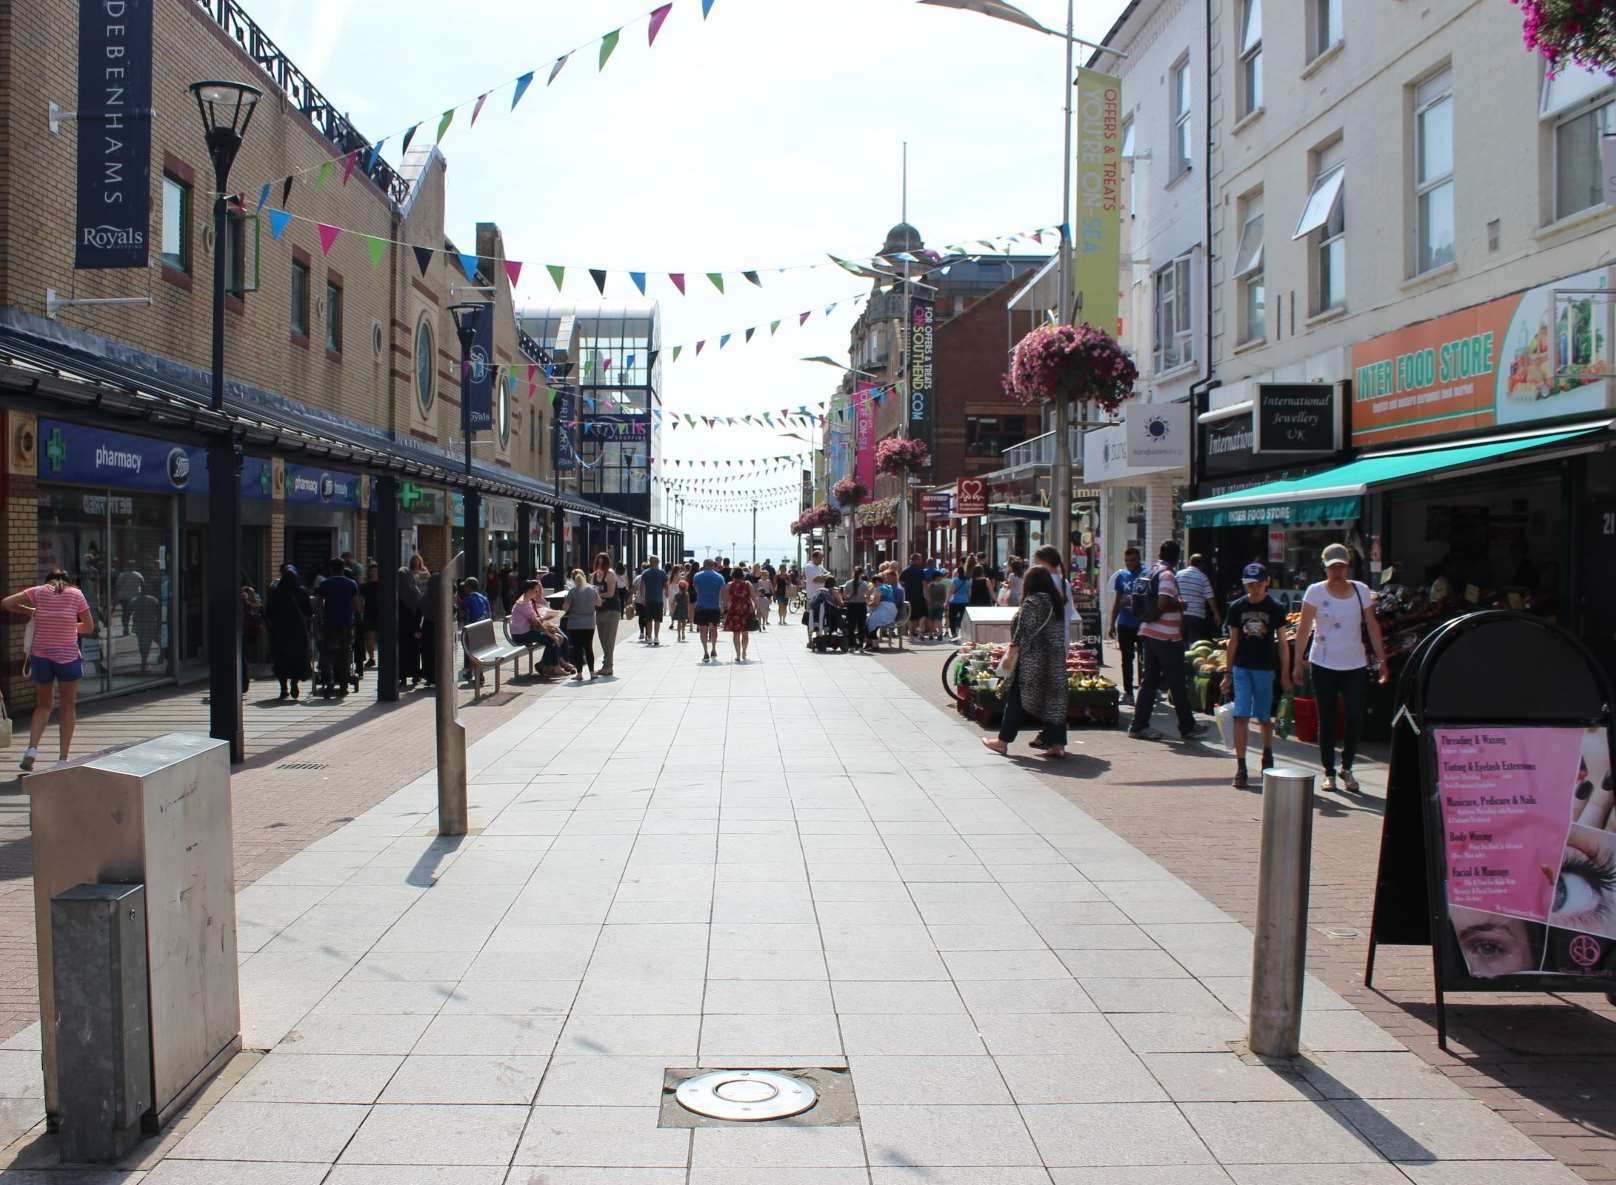 Southend: Car-free pedestrianised high street with Royals Arcade makes shopping a pleasure.